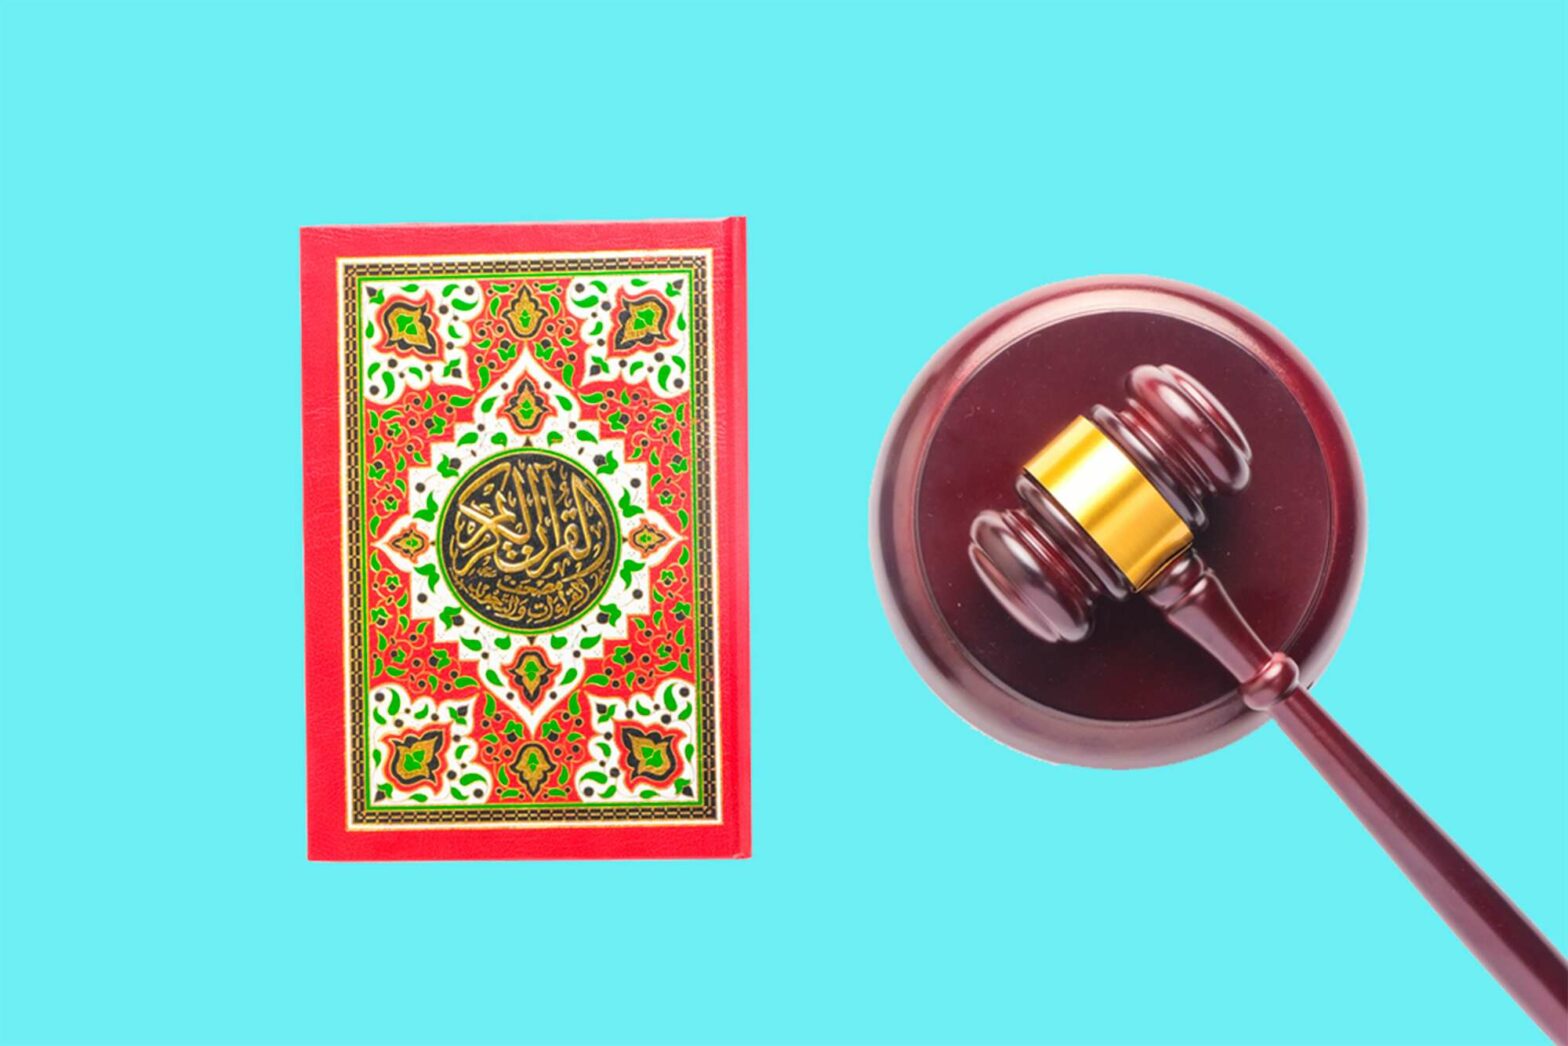 shariah law and islamic banking in pakistan